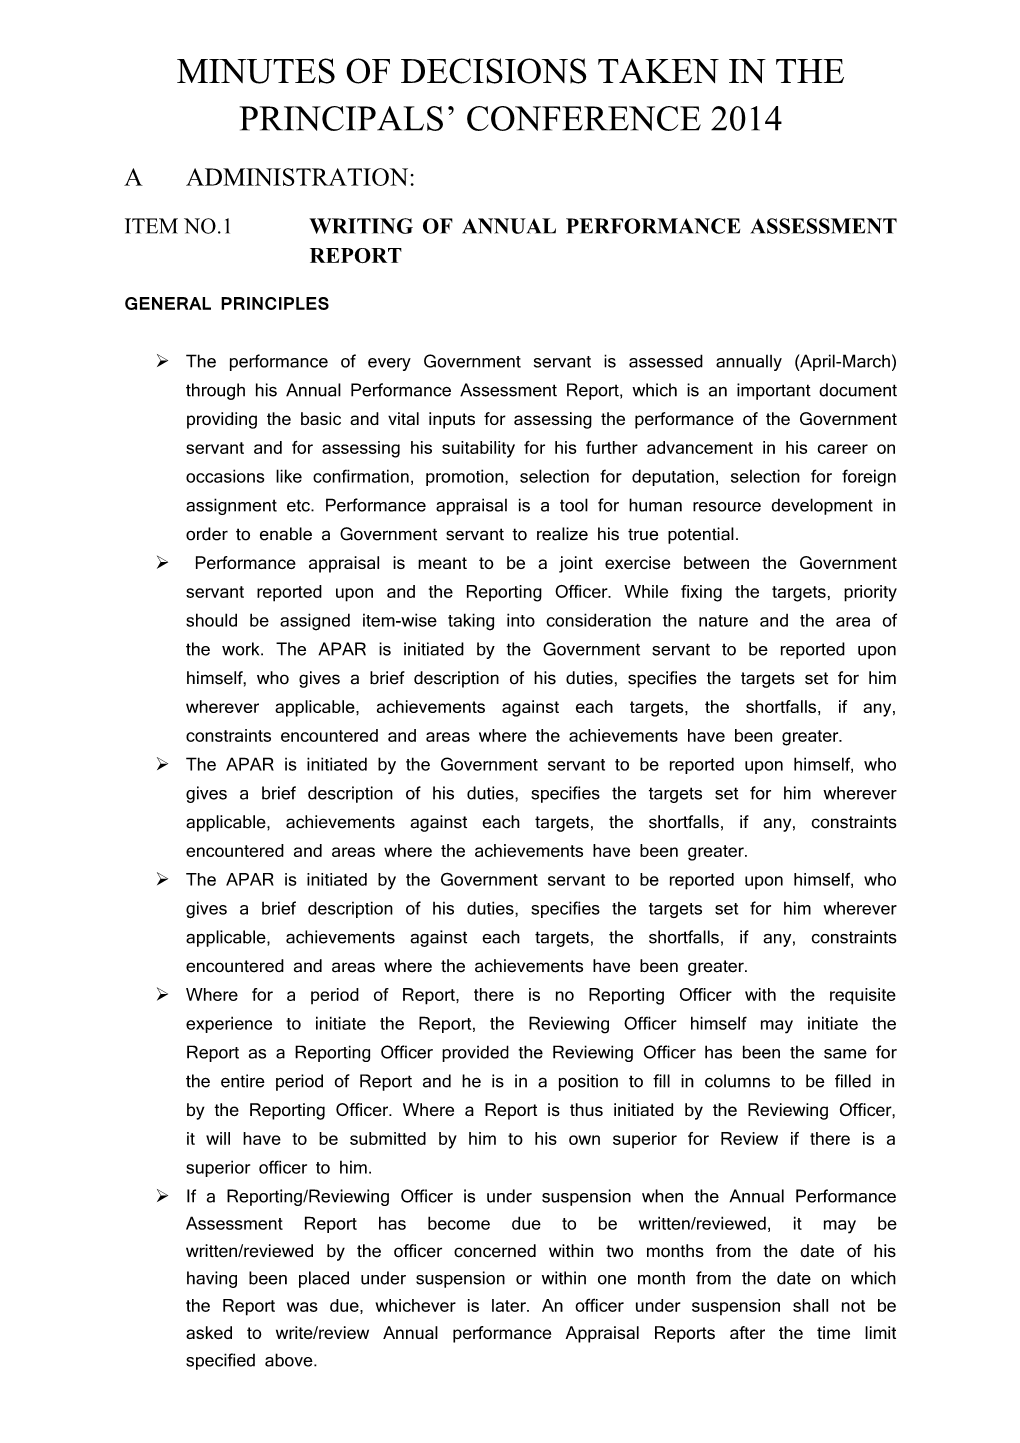 Item No.1 Writing of Annual Performance Assessment Report